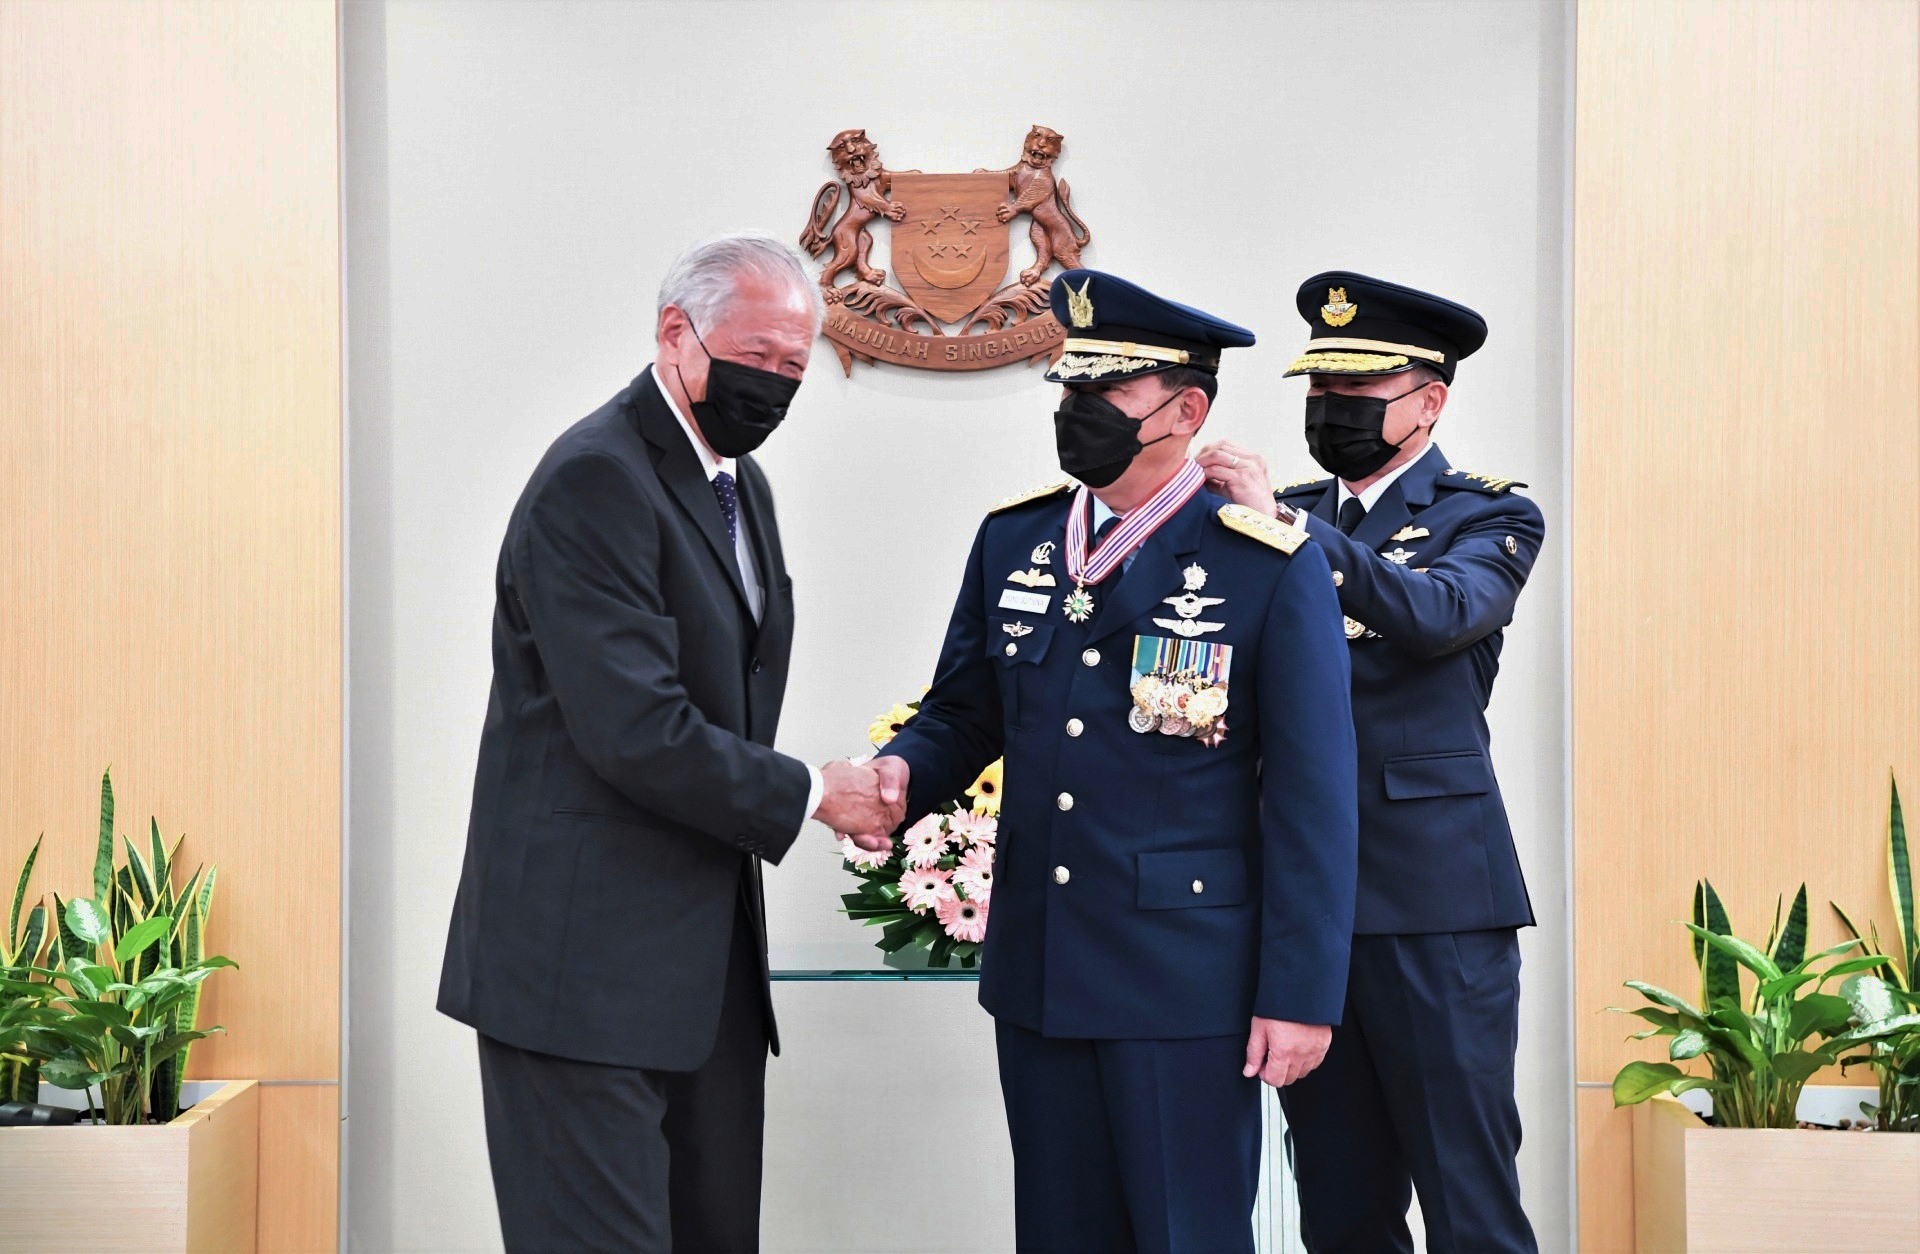 The former Chief of Staff of the Indonesian Air Force (TNI AU), Air Chief Marshal (ACM) (Rtd) Yuyu Sutisna (middle) was presented the Meritorious Service Medal (Military) by Minister for Defence Dr Ng Eng Hen (left) at the Ministry of Defence (MINDEF) earlier today.